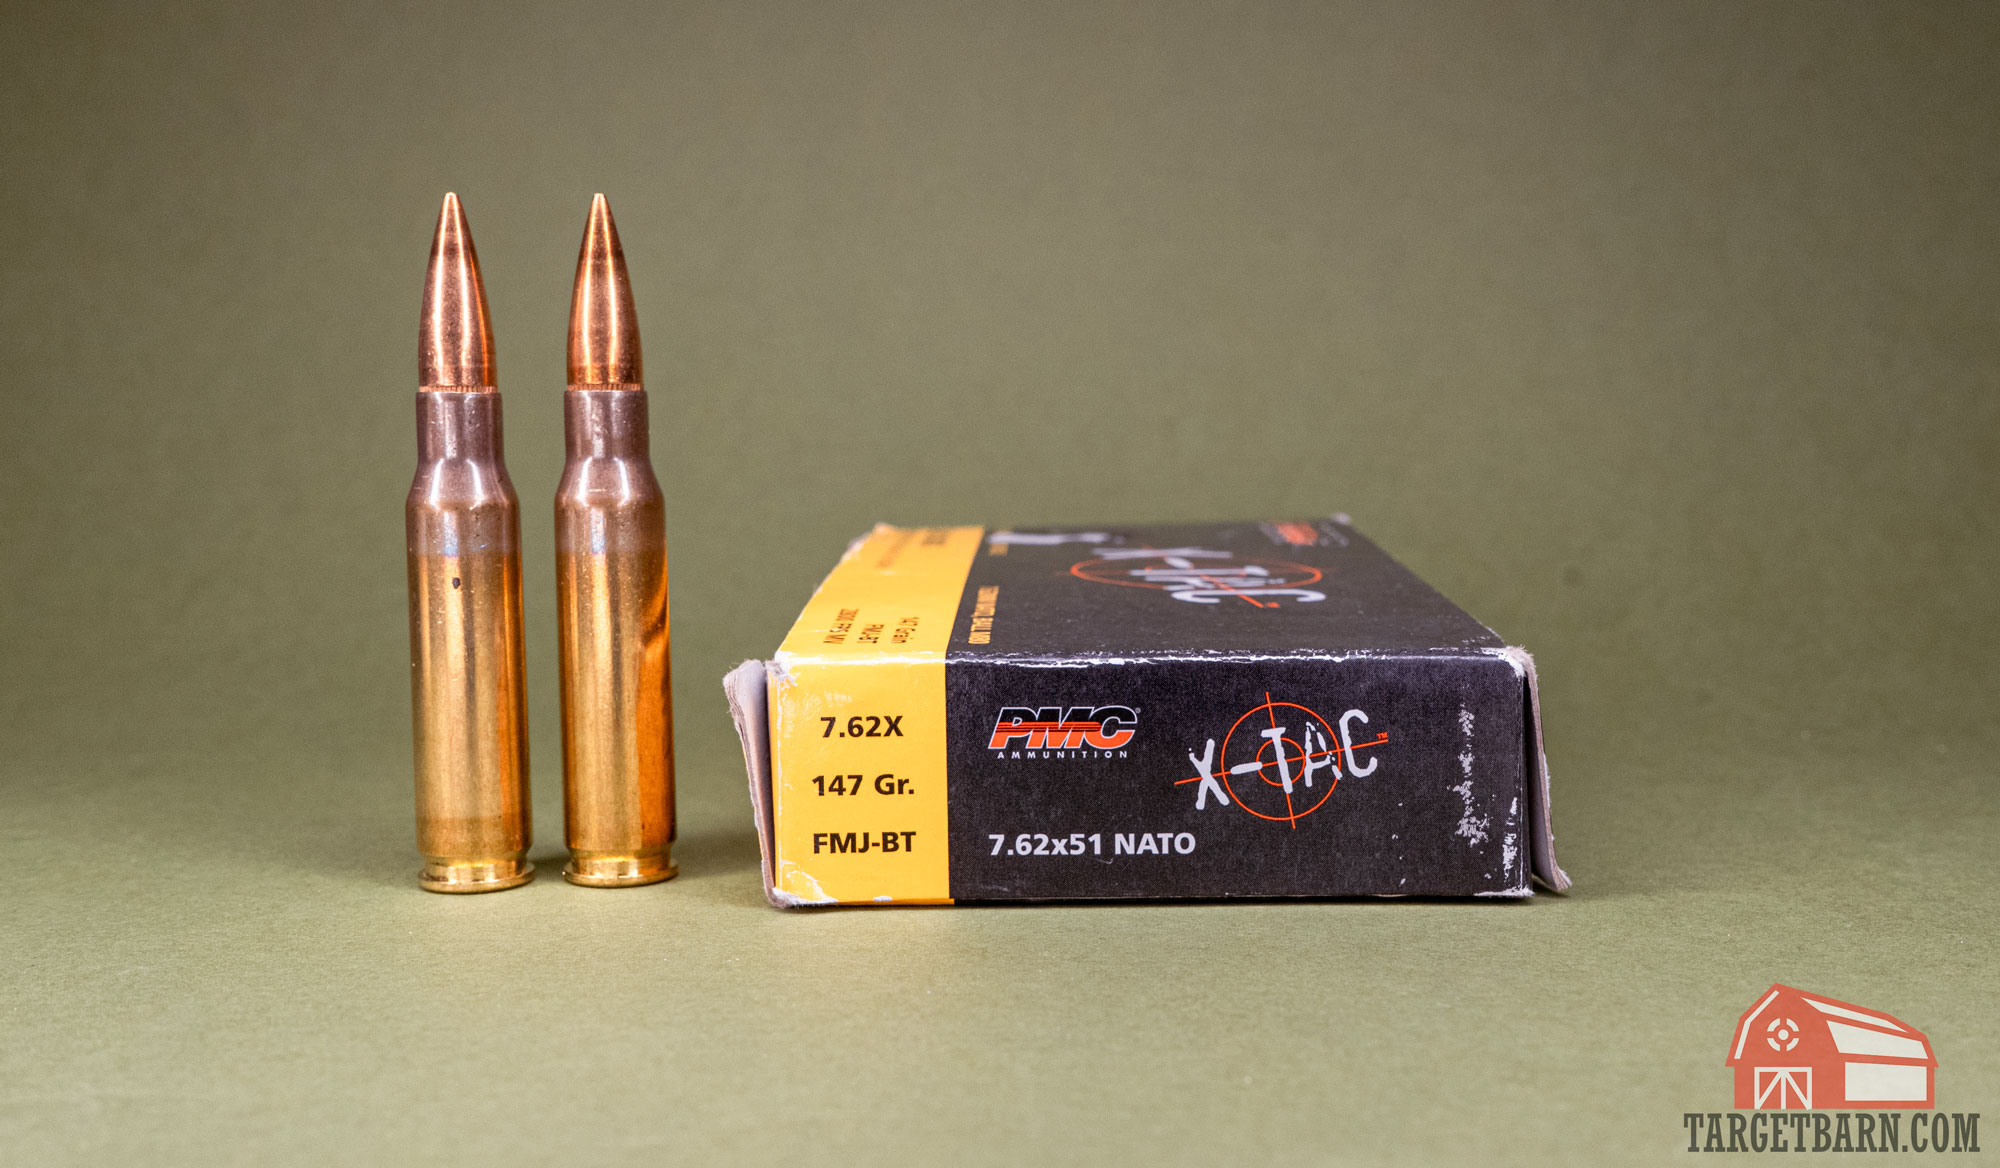 a box of x-tac 7.62 nato and two rounds of 7.62